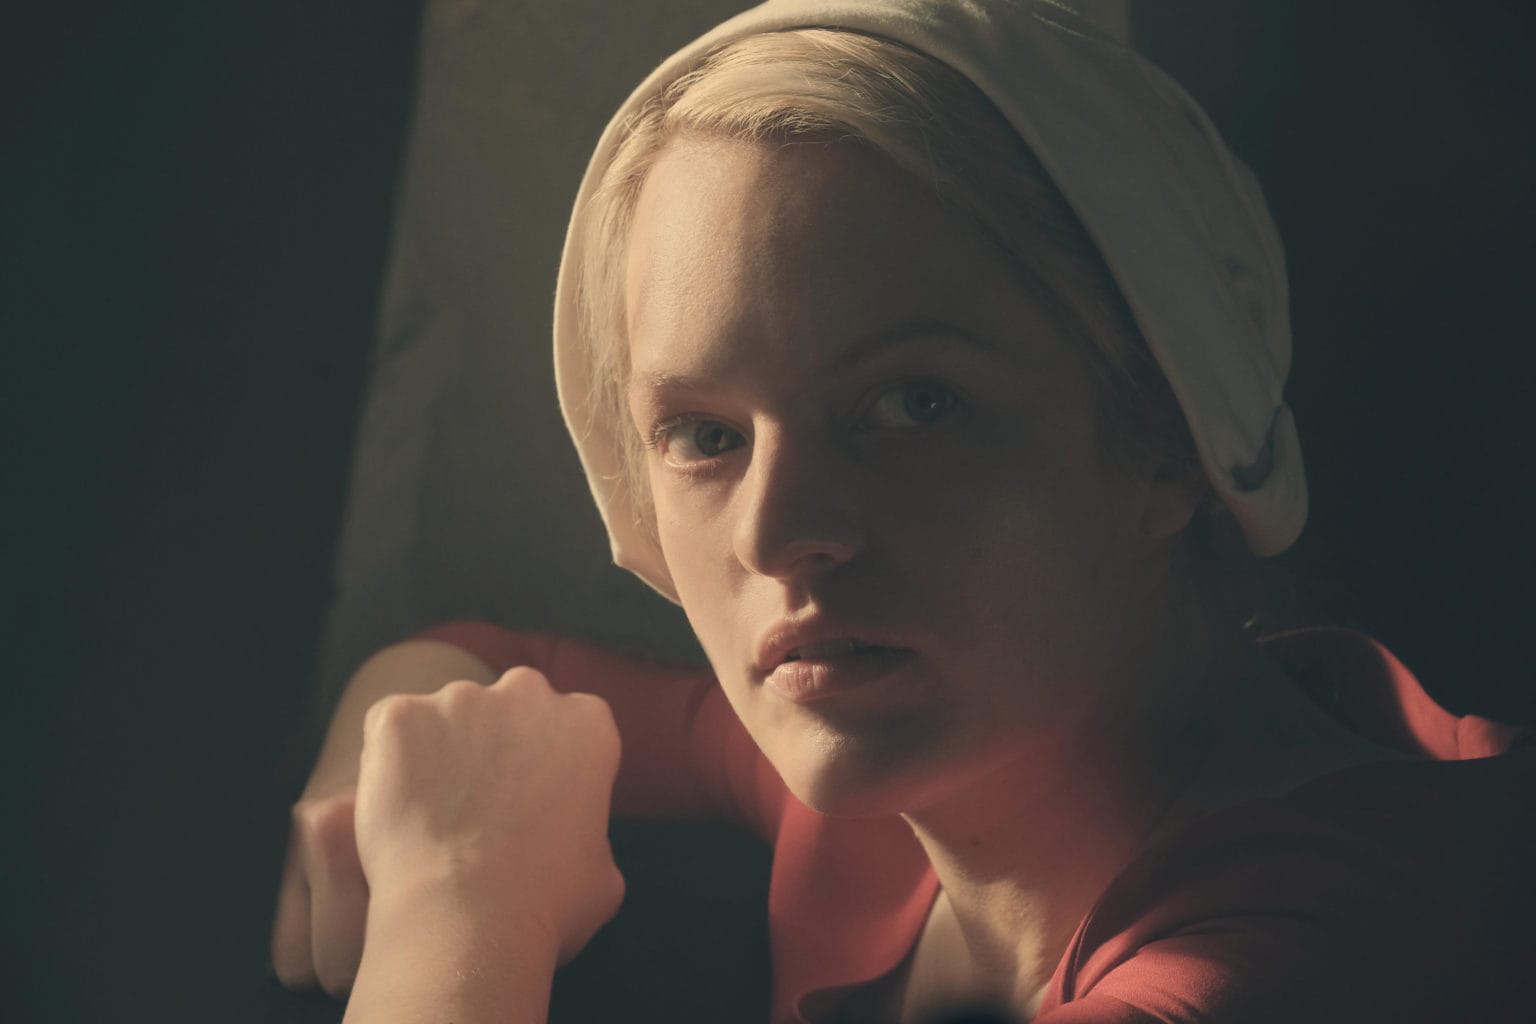 In The Handmaid's Tale, Elisabeth Moss makes the nightmare real.